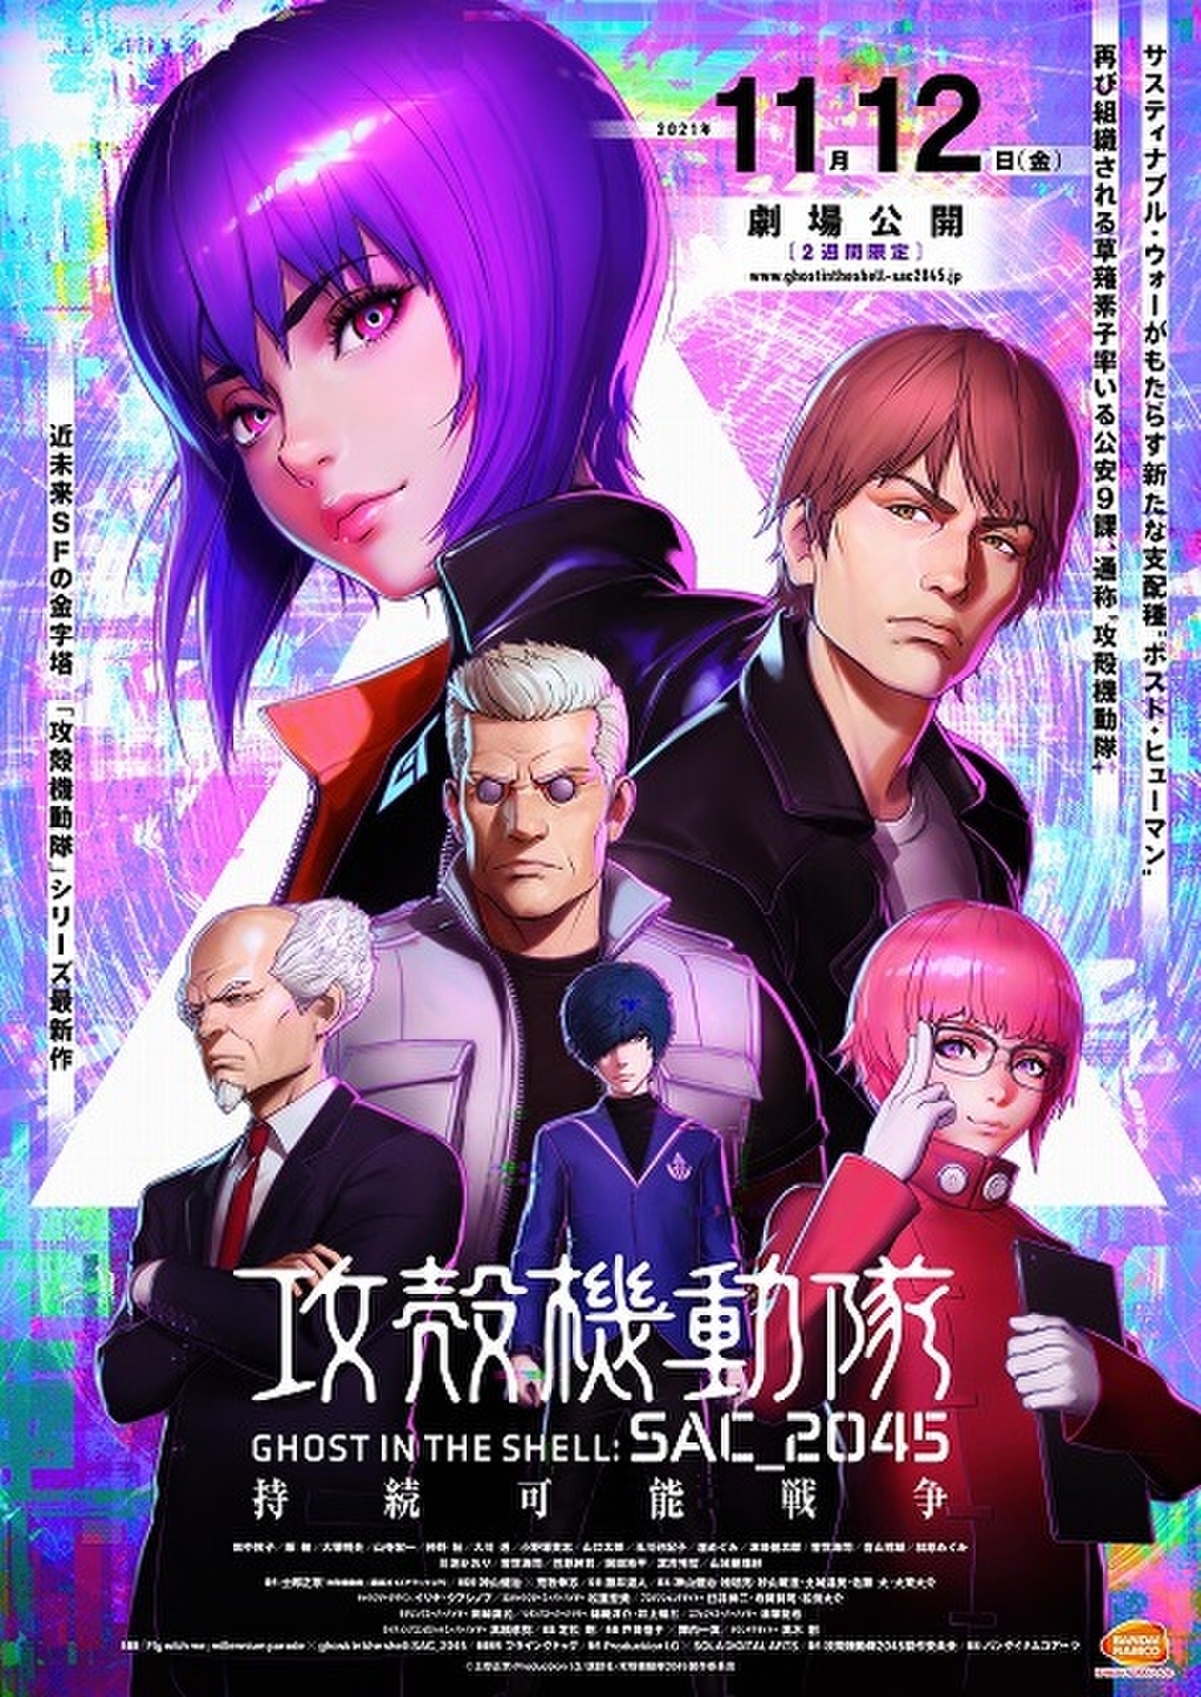 GHOST IN THE SHELL / 攻殻機動隊 ポスター poster種類アニメコミック 